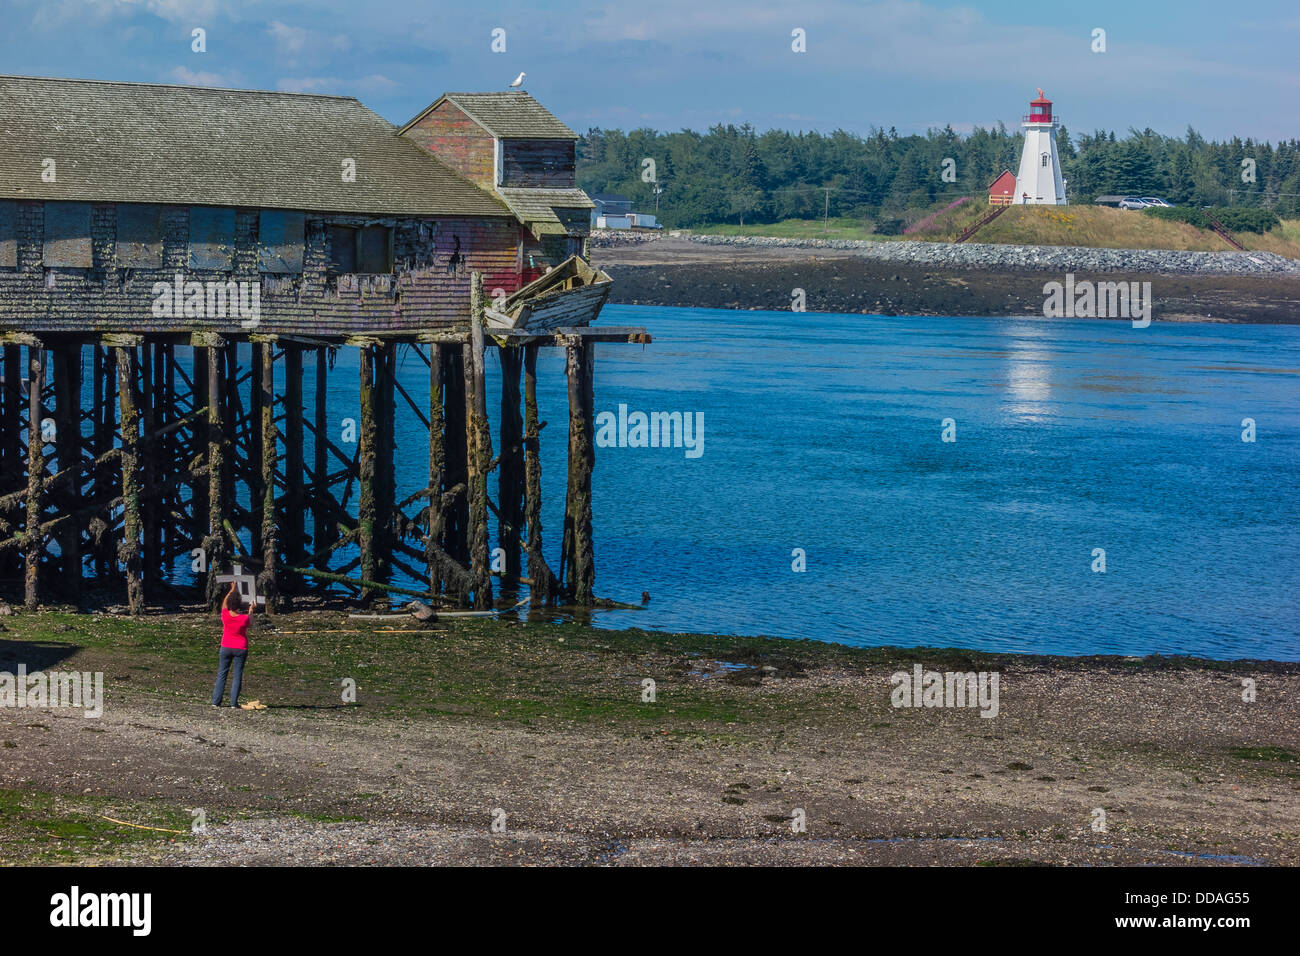 A female artist uses a cropping tool to find the best view of a fish processing building on stilts & lighthouse for a painting. Stock Photo